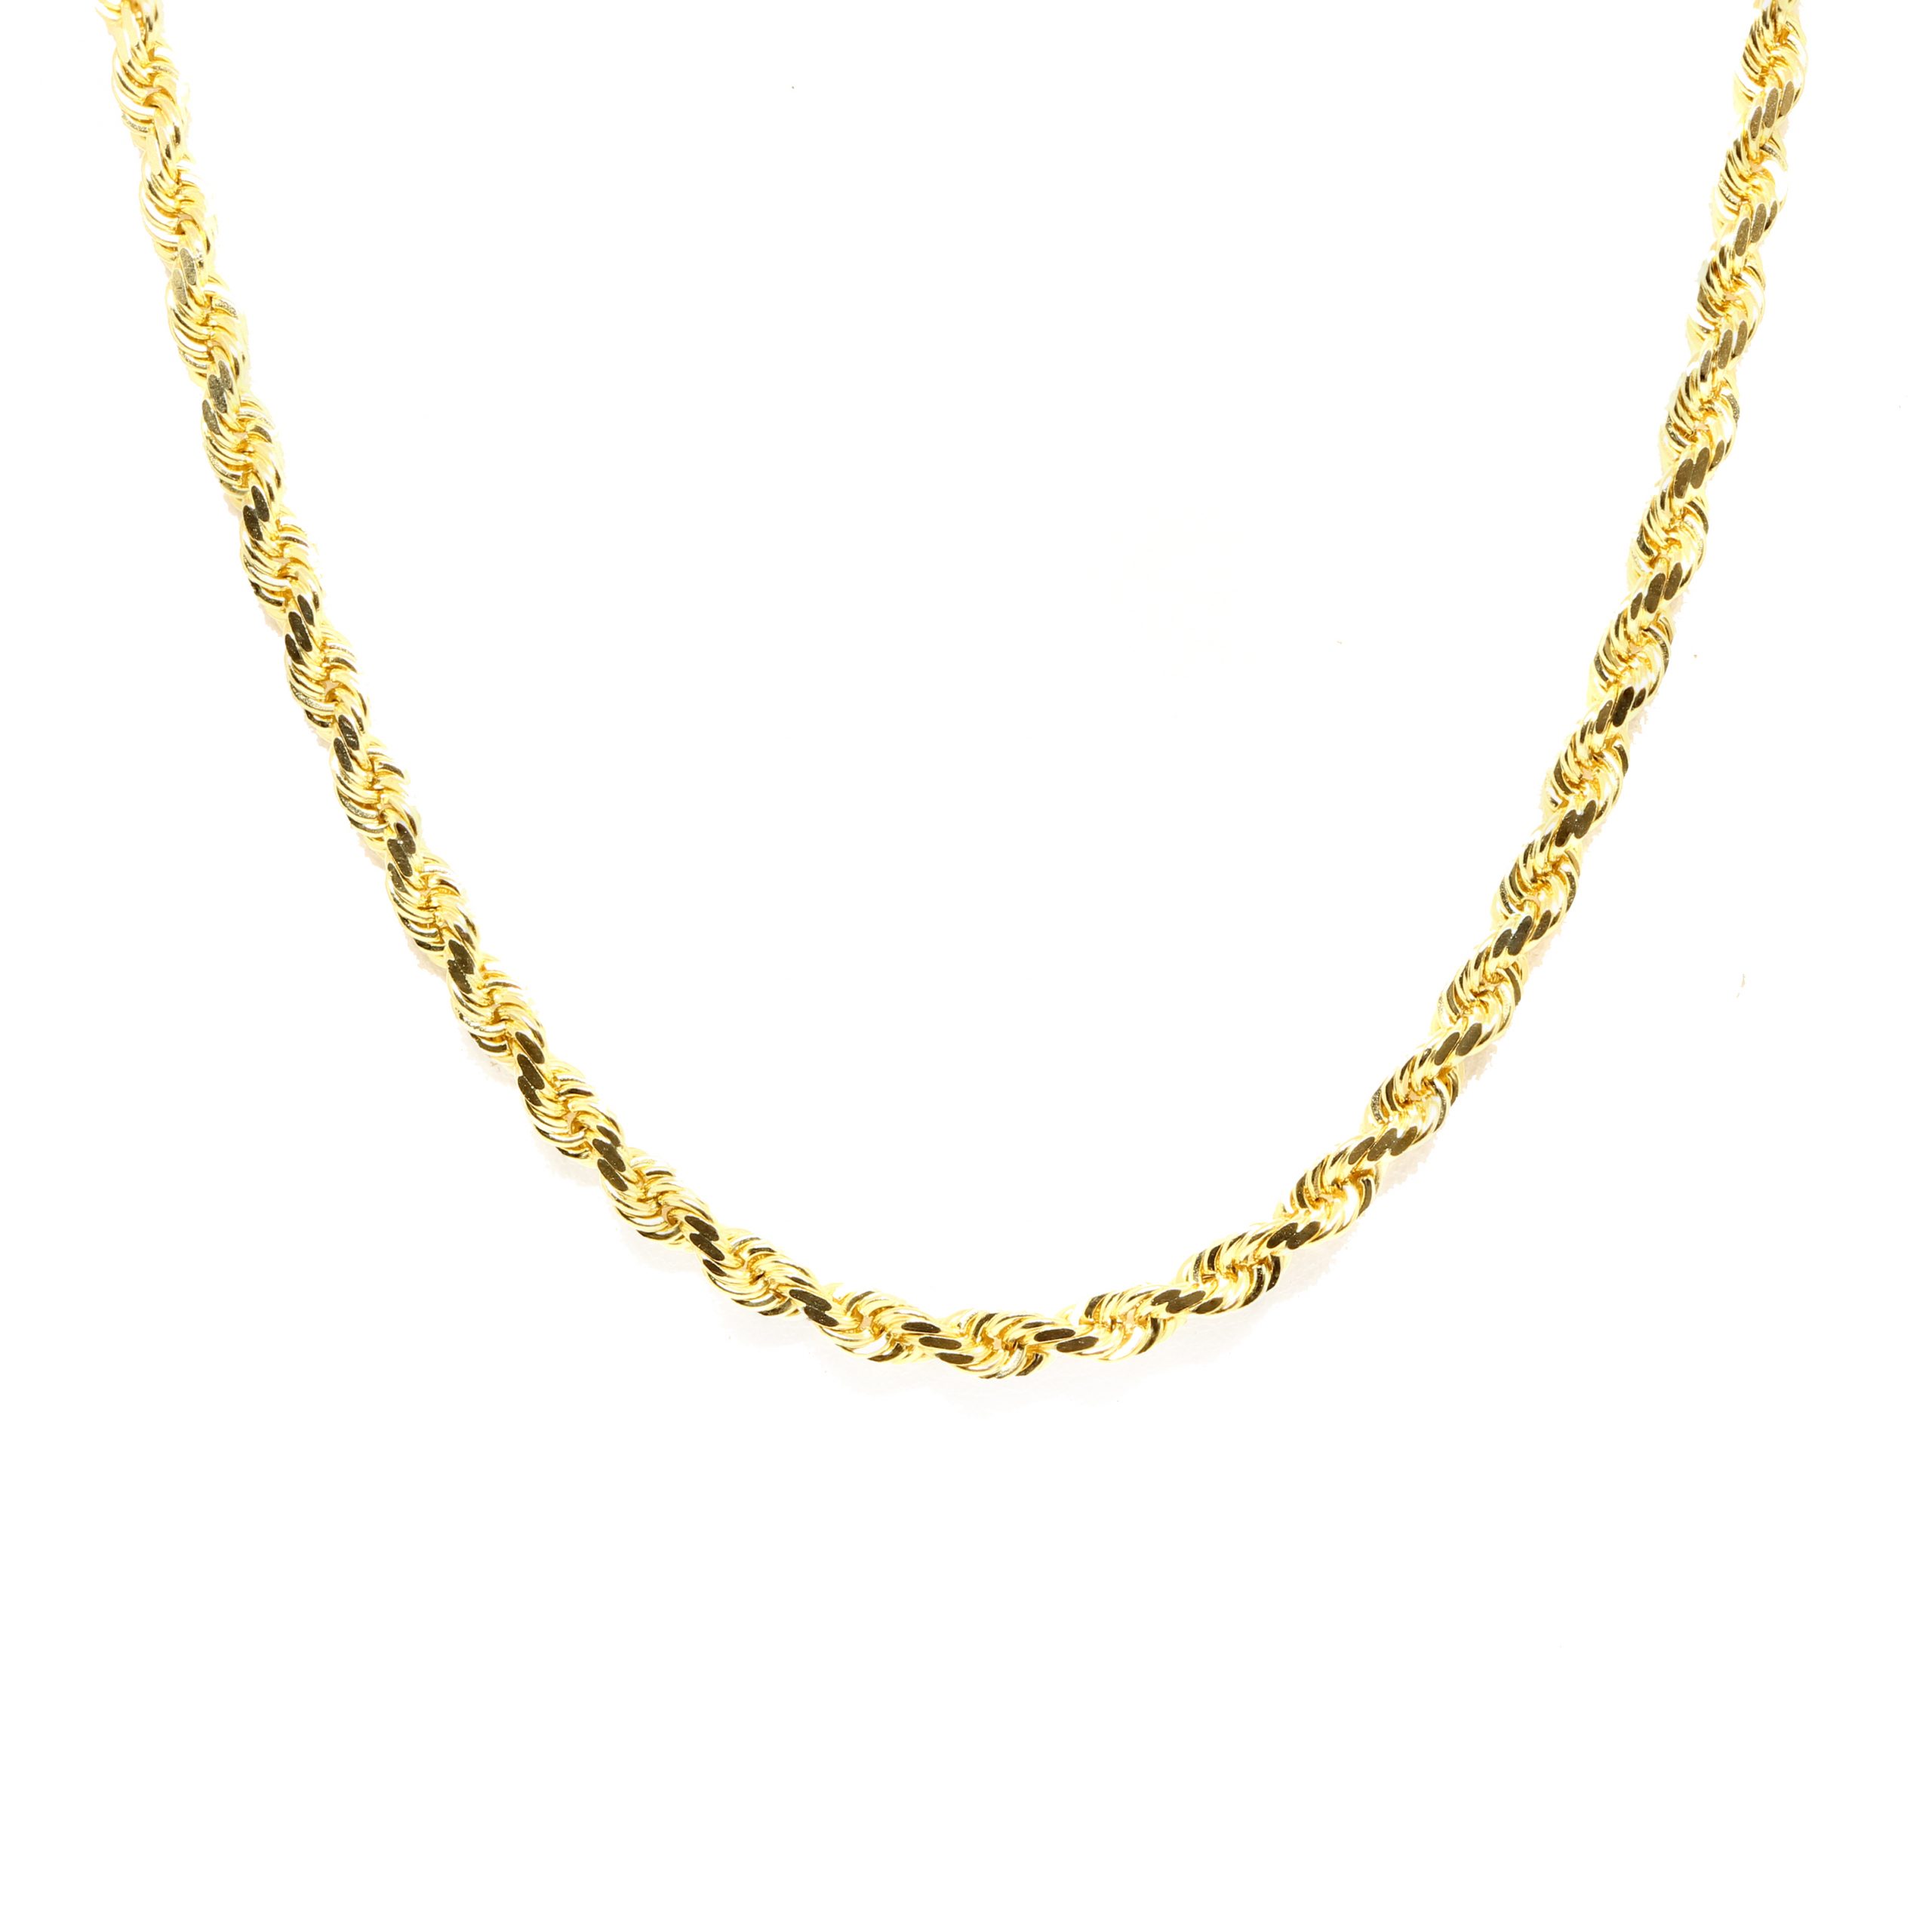 Gold Longhorn Head Necklace for him or her made in solid 14kt gold – Chris  Chaney